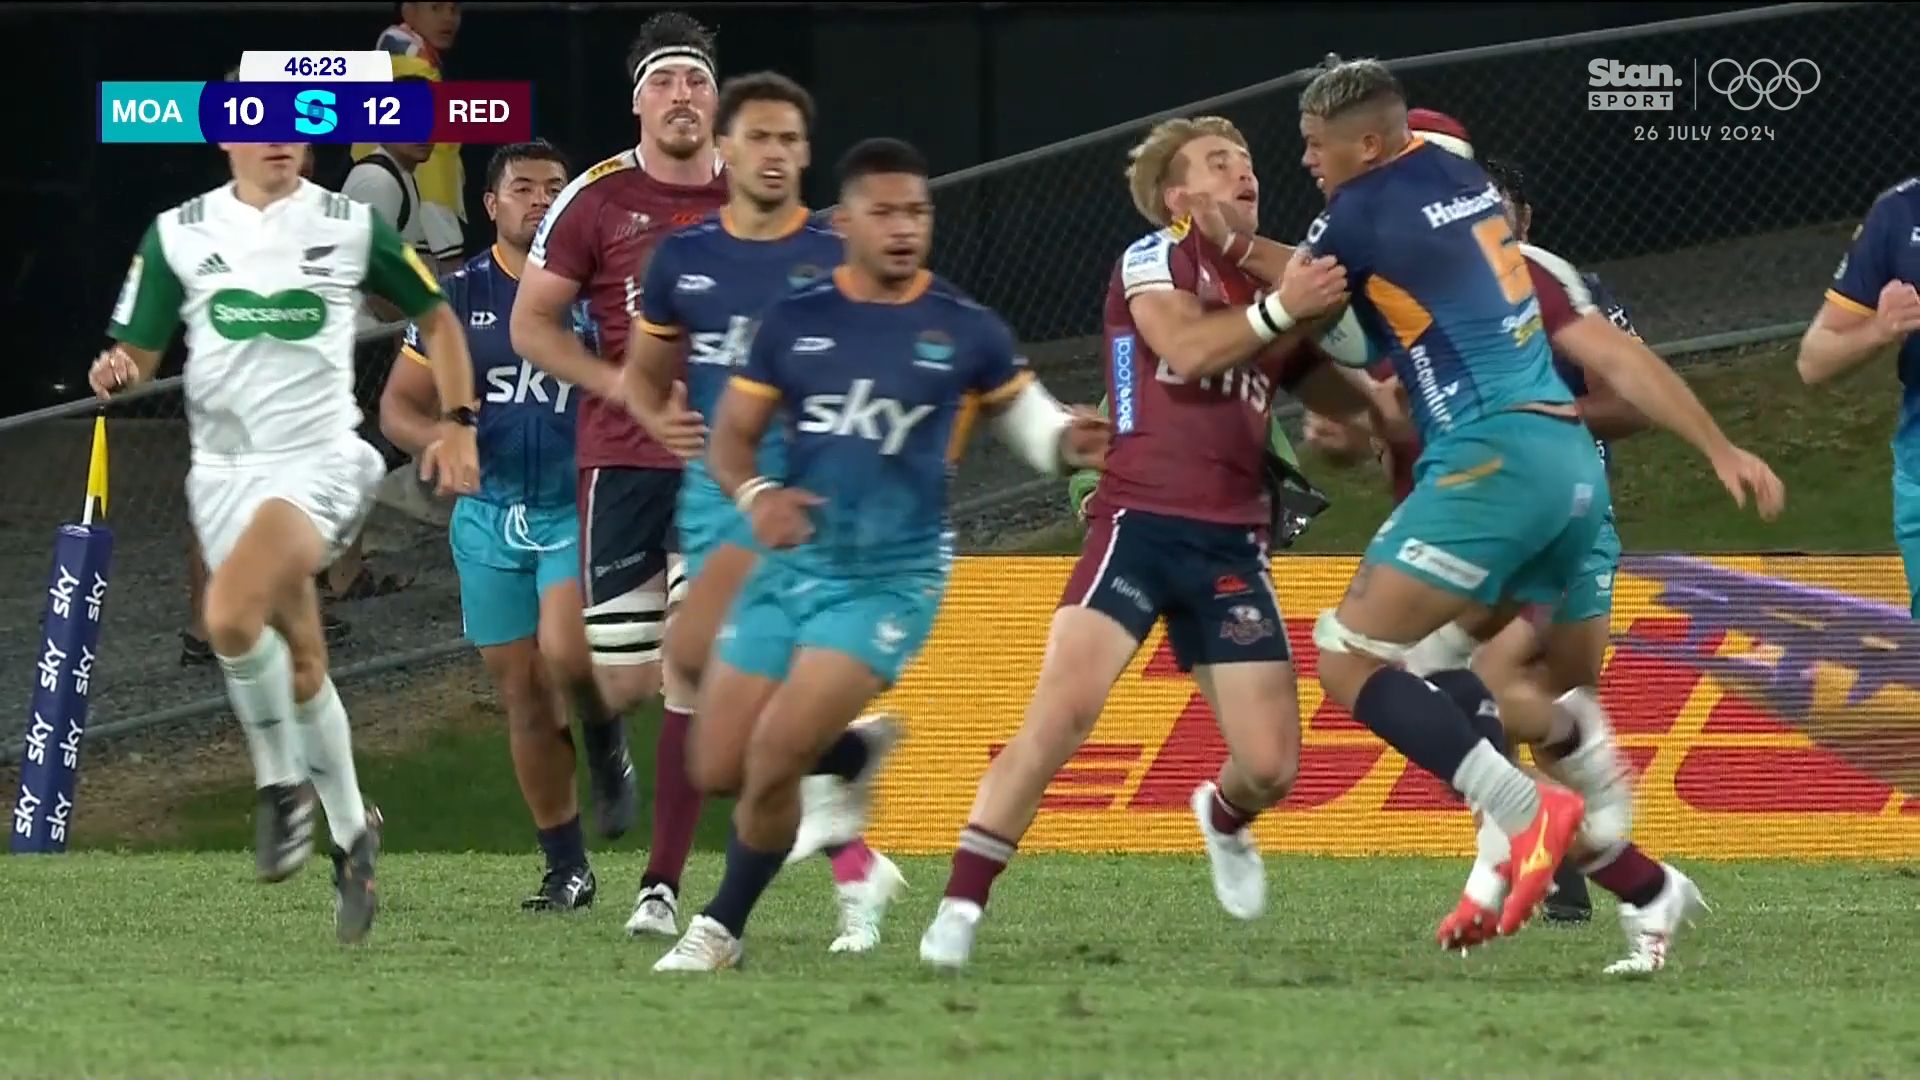 'Deliberate abuse': Queensland Reds stars slapped with bans after costly loss to Moana Pasifika